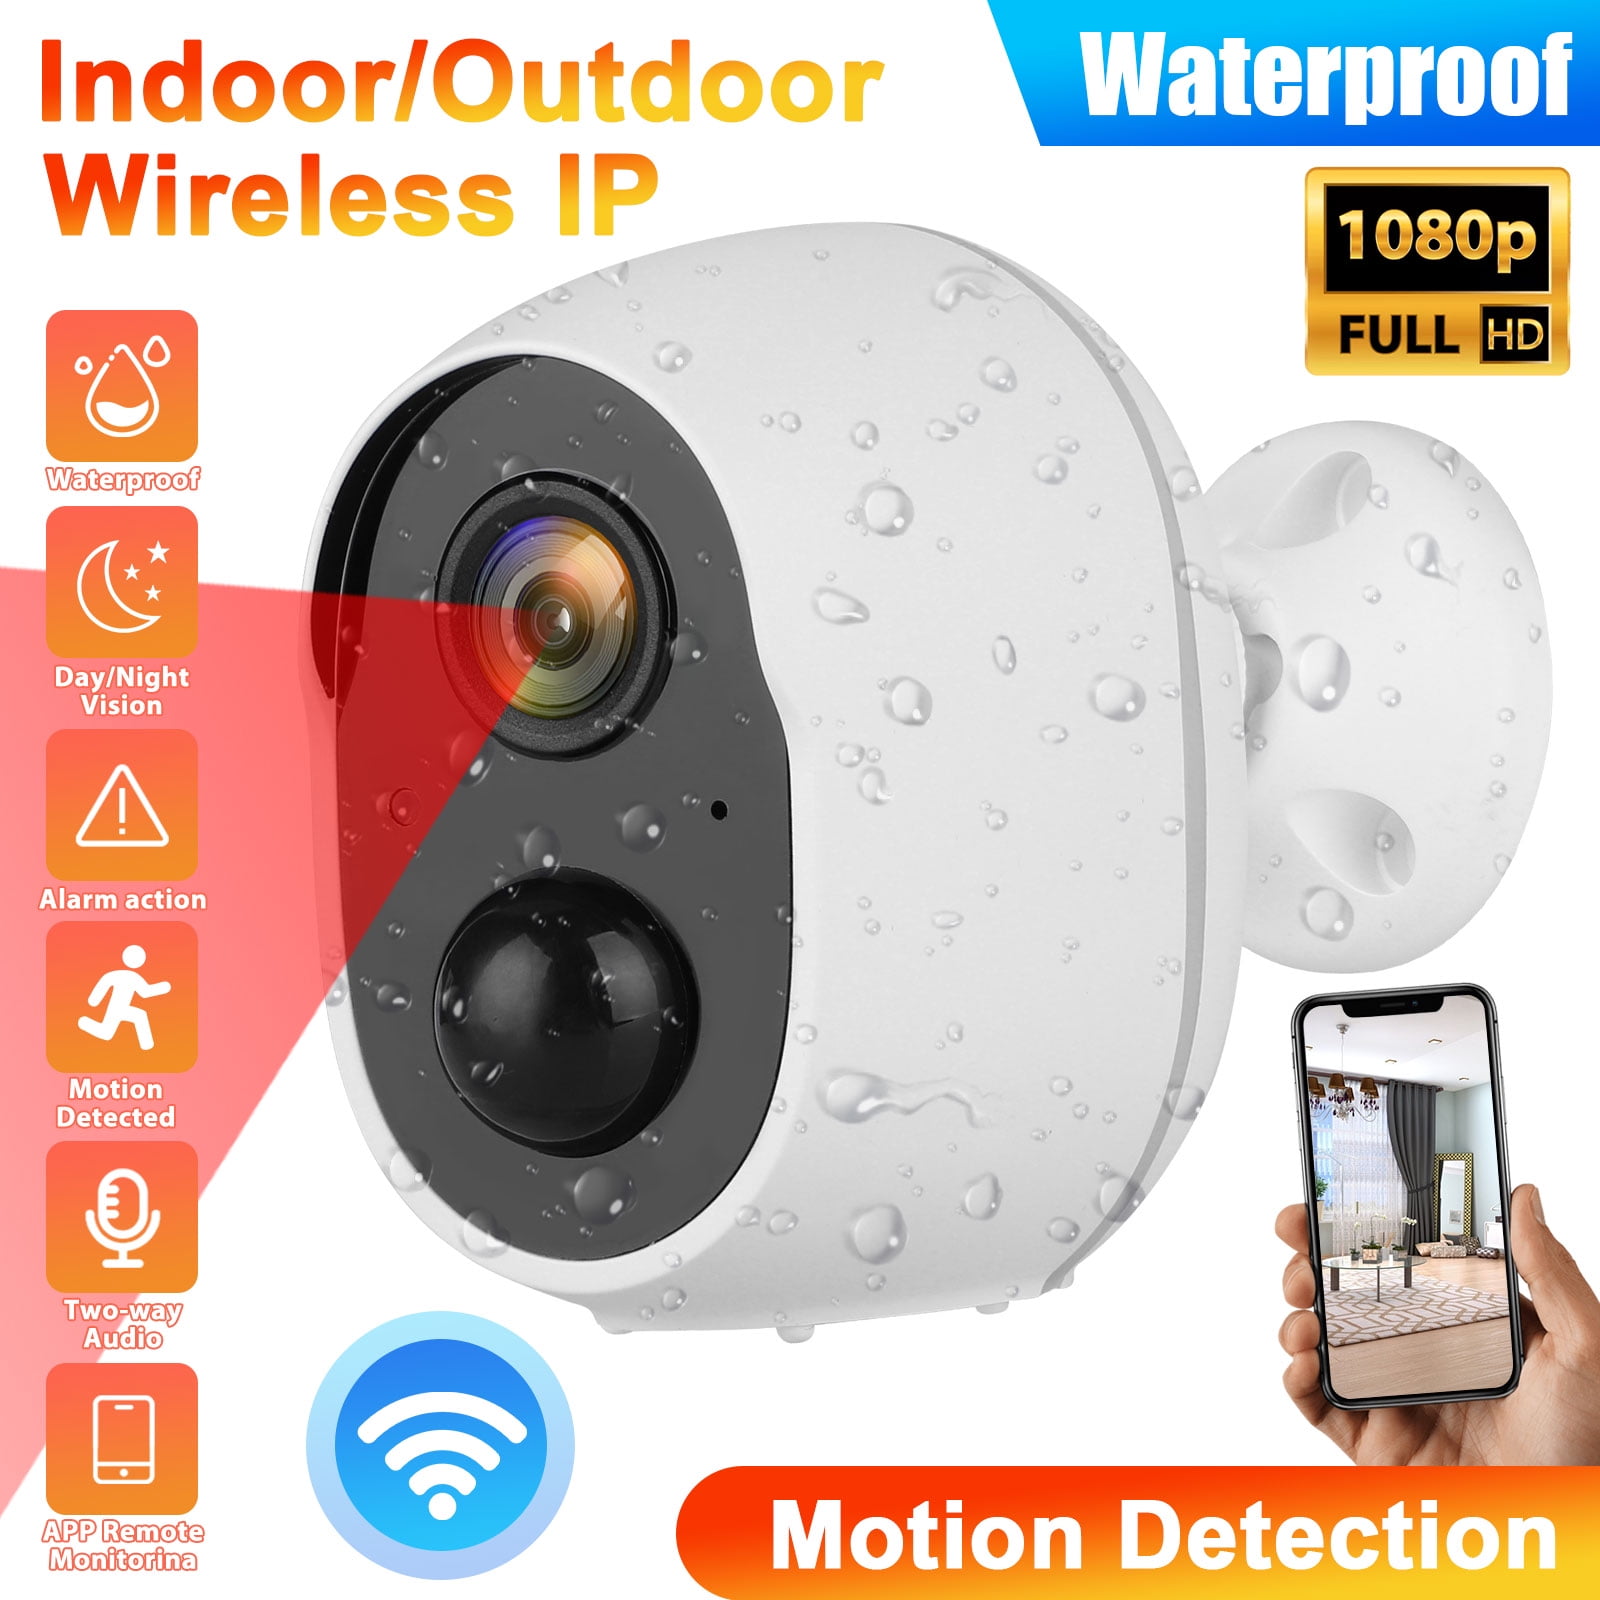 ONWOTE 4 960P HD Outdoor Wireless Home Security Camera System with Night Vision